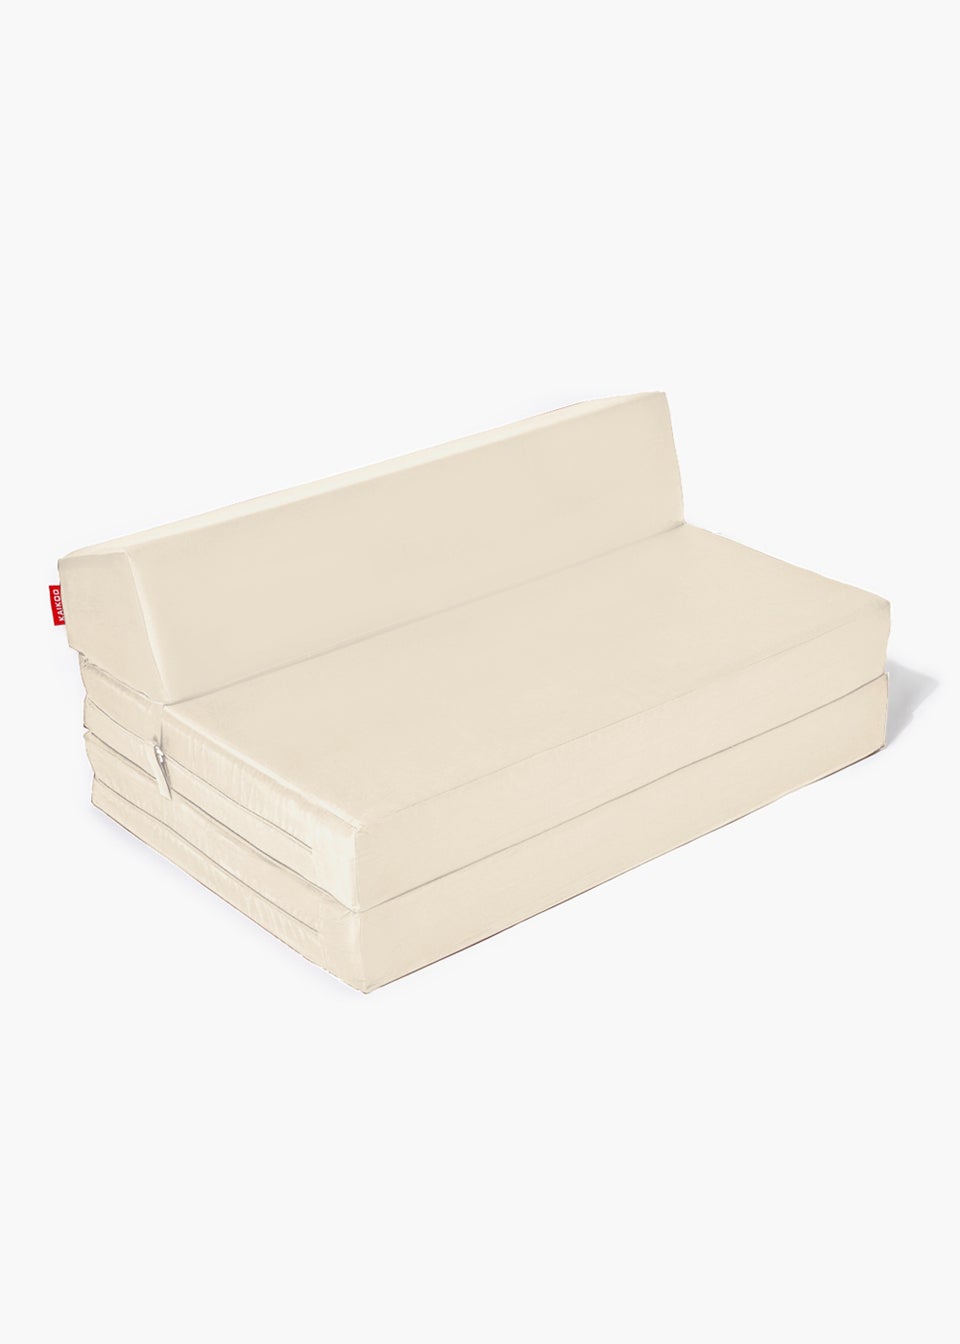 Kaikoo Double Fold out Chair Bed Cream